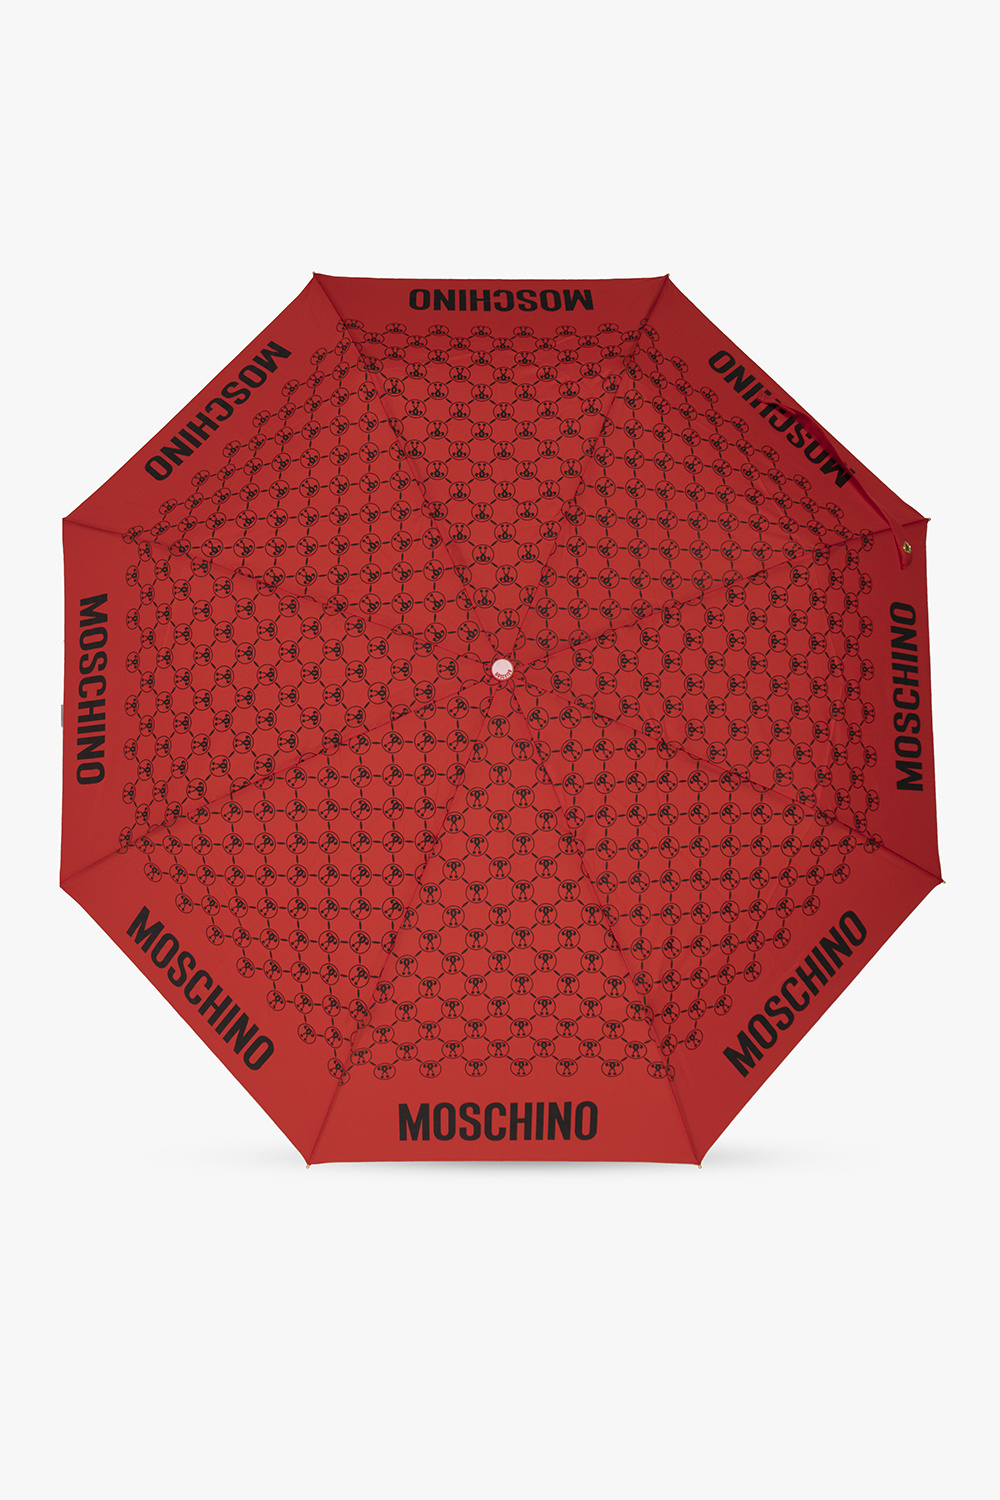 Moschino Discover our guide to exclusive gifts that will impress every demanding fashion lover